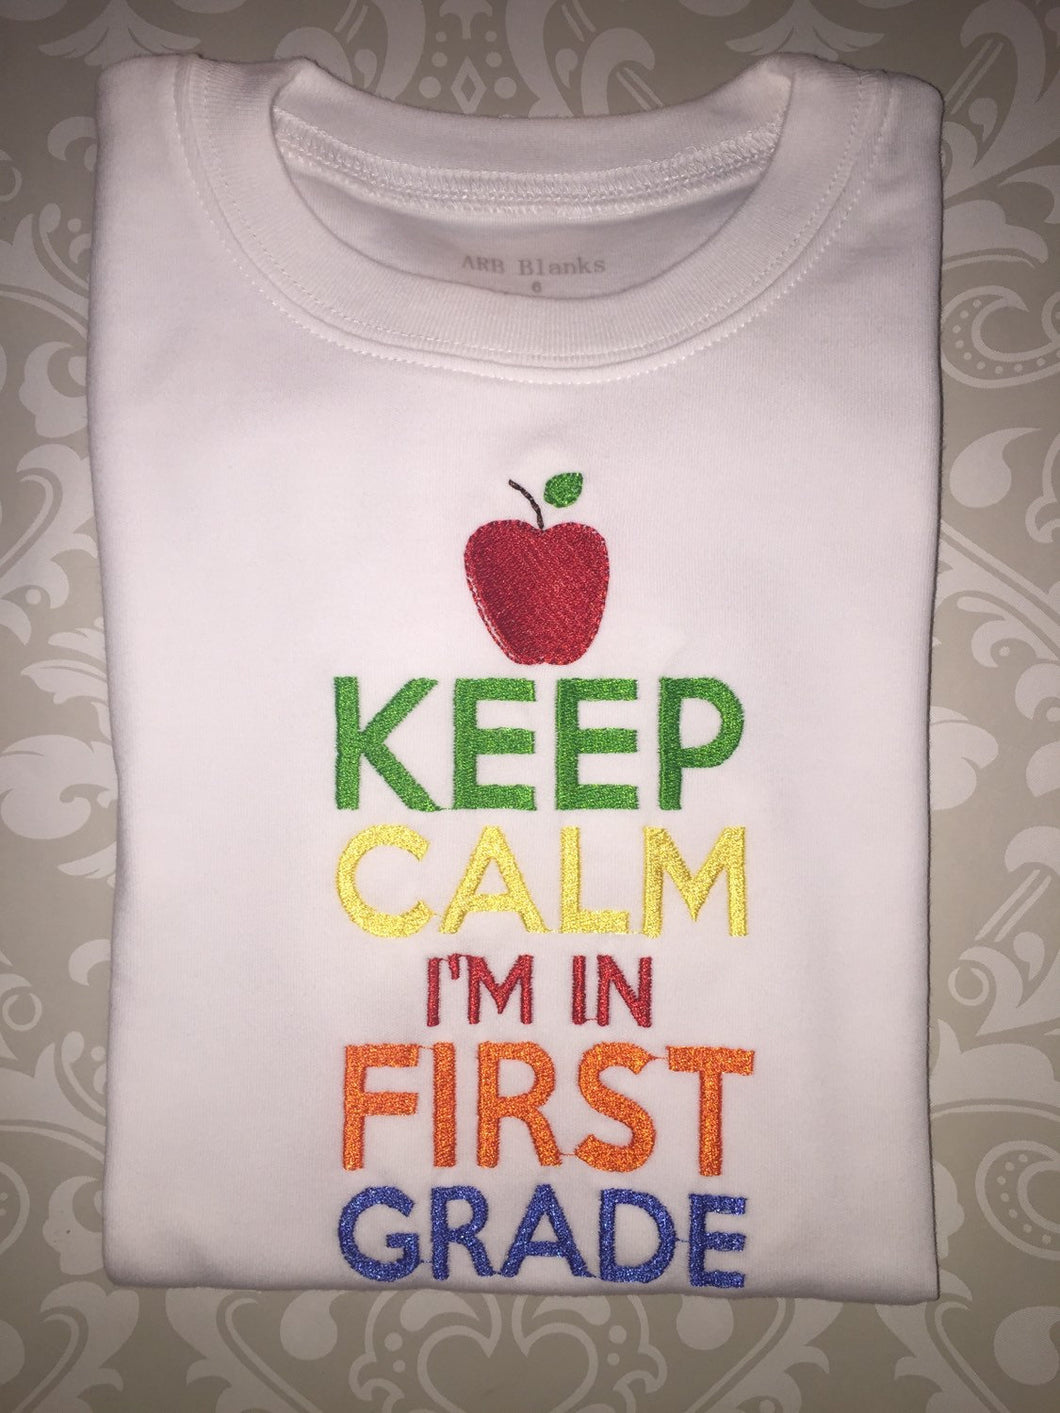 Keep Calm I'm in first grade tee